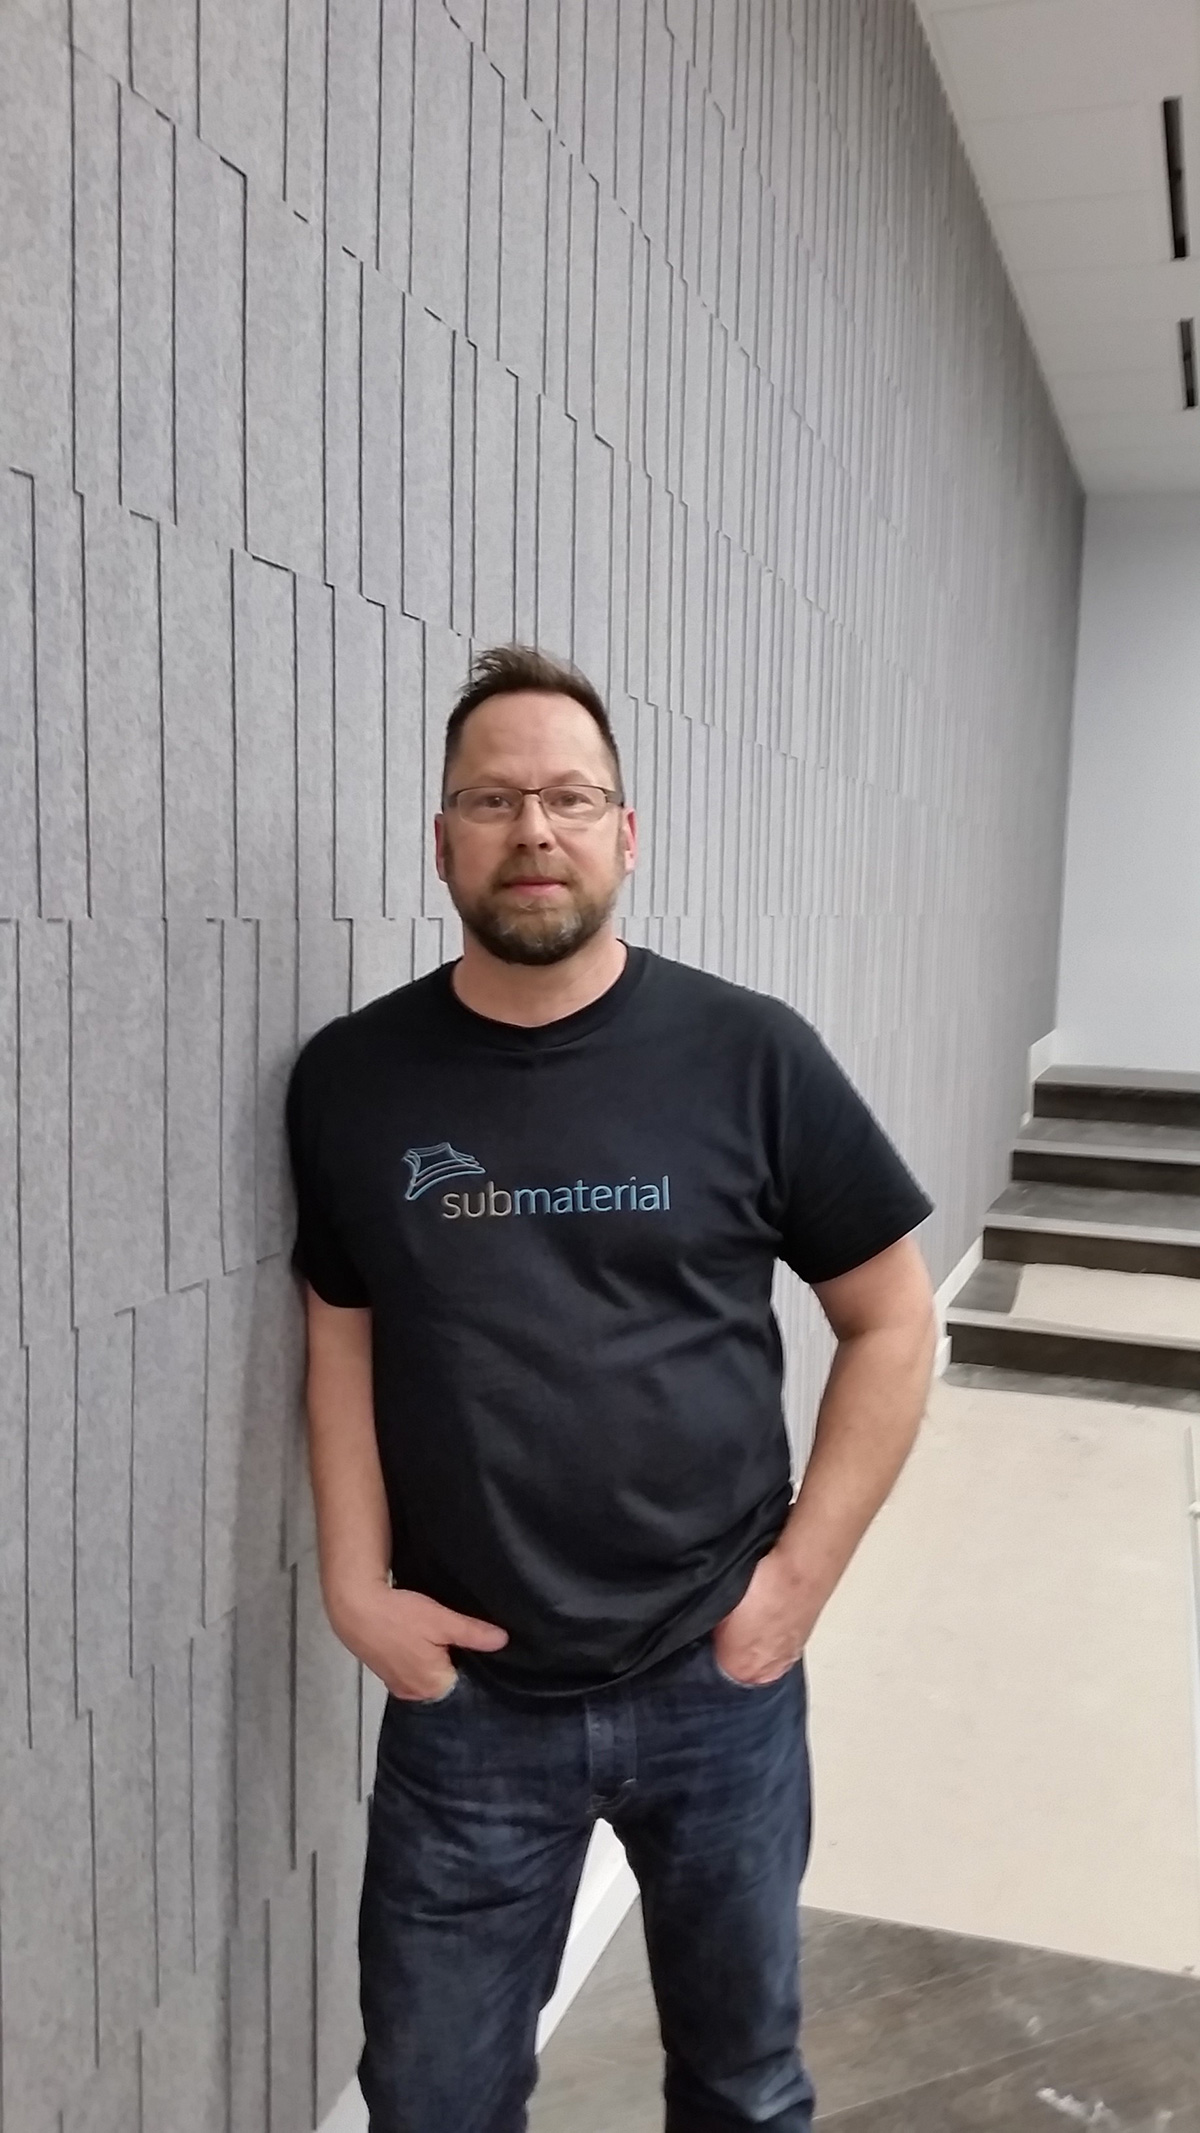 David Hamlin leaning against a gray felt wall covering wearing a t-shirt with the Submaterial logo.